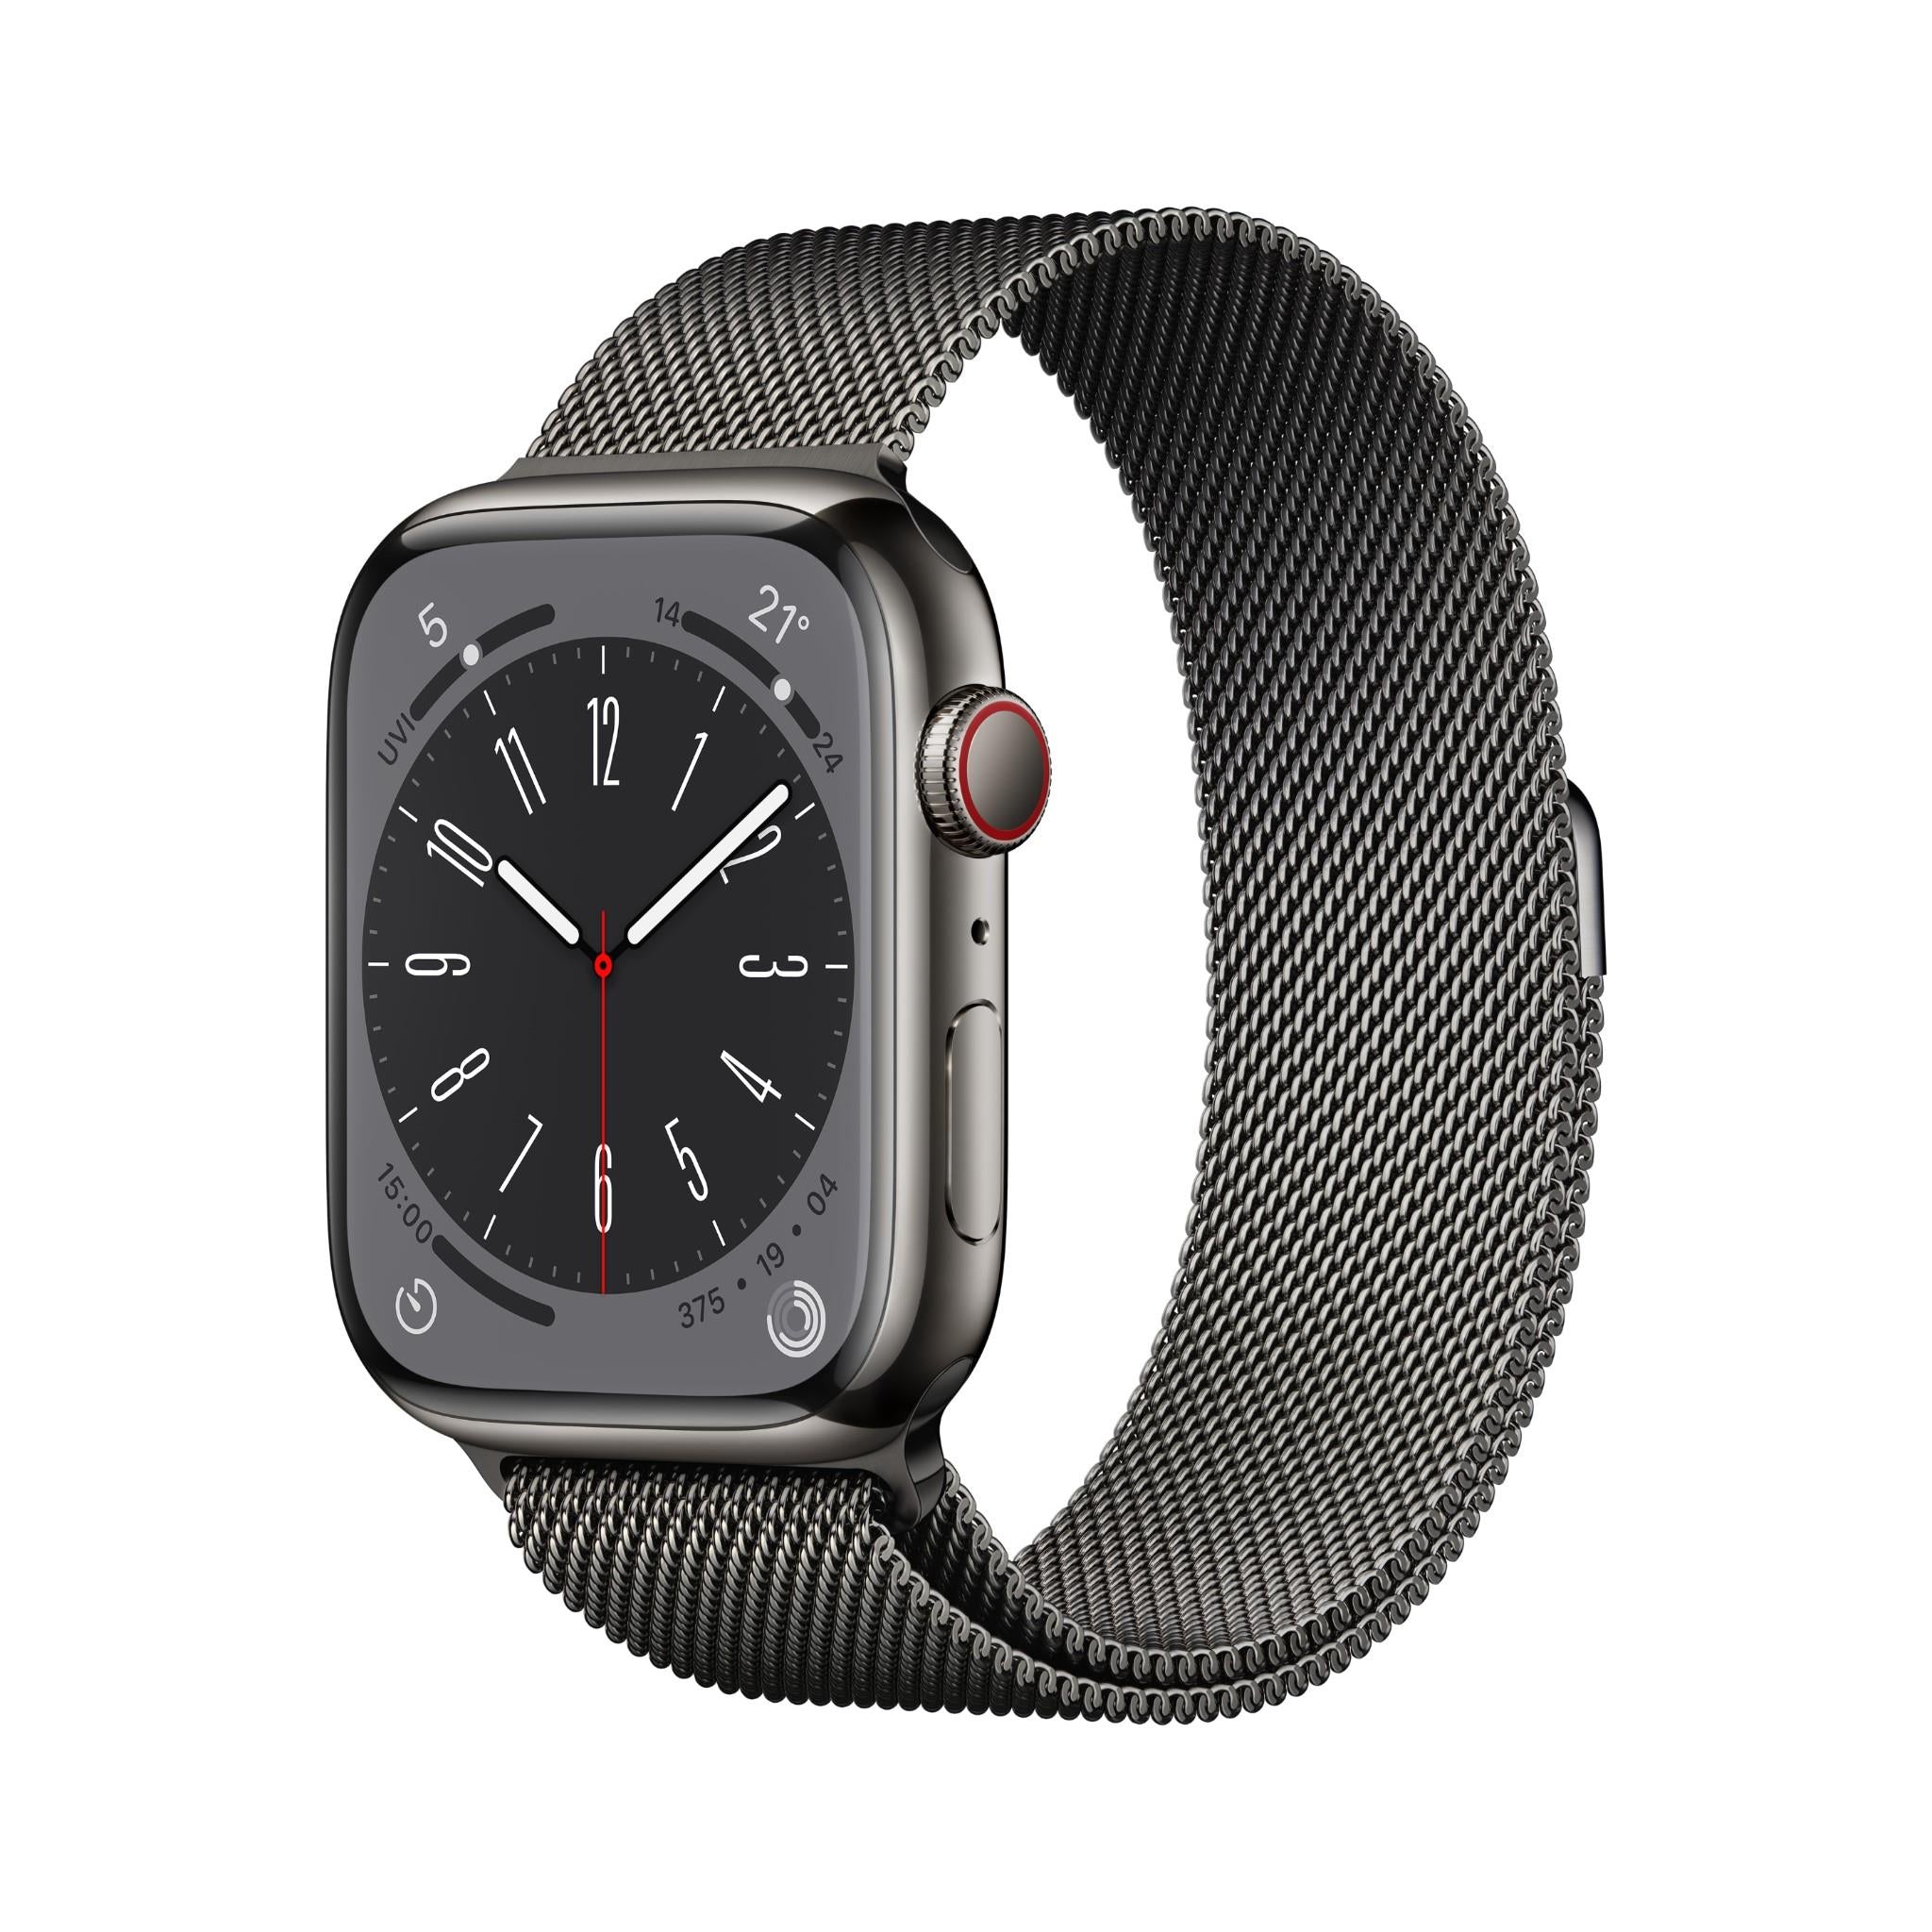 Apple Watch Series 8 41mm Graphite Stainless Steel Case GPS + 